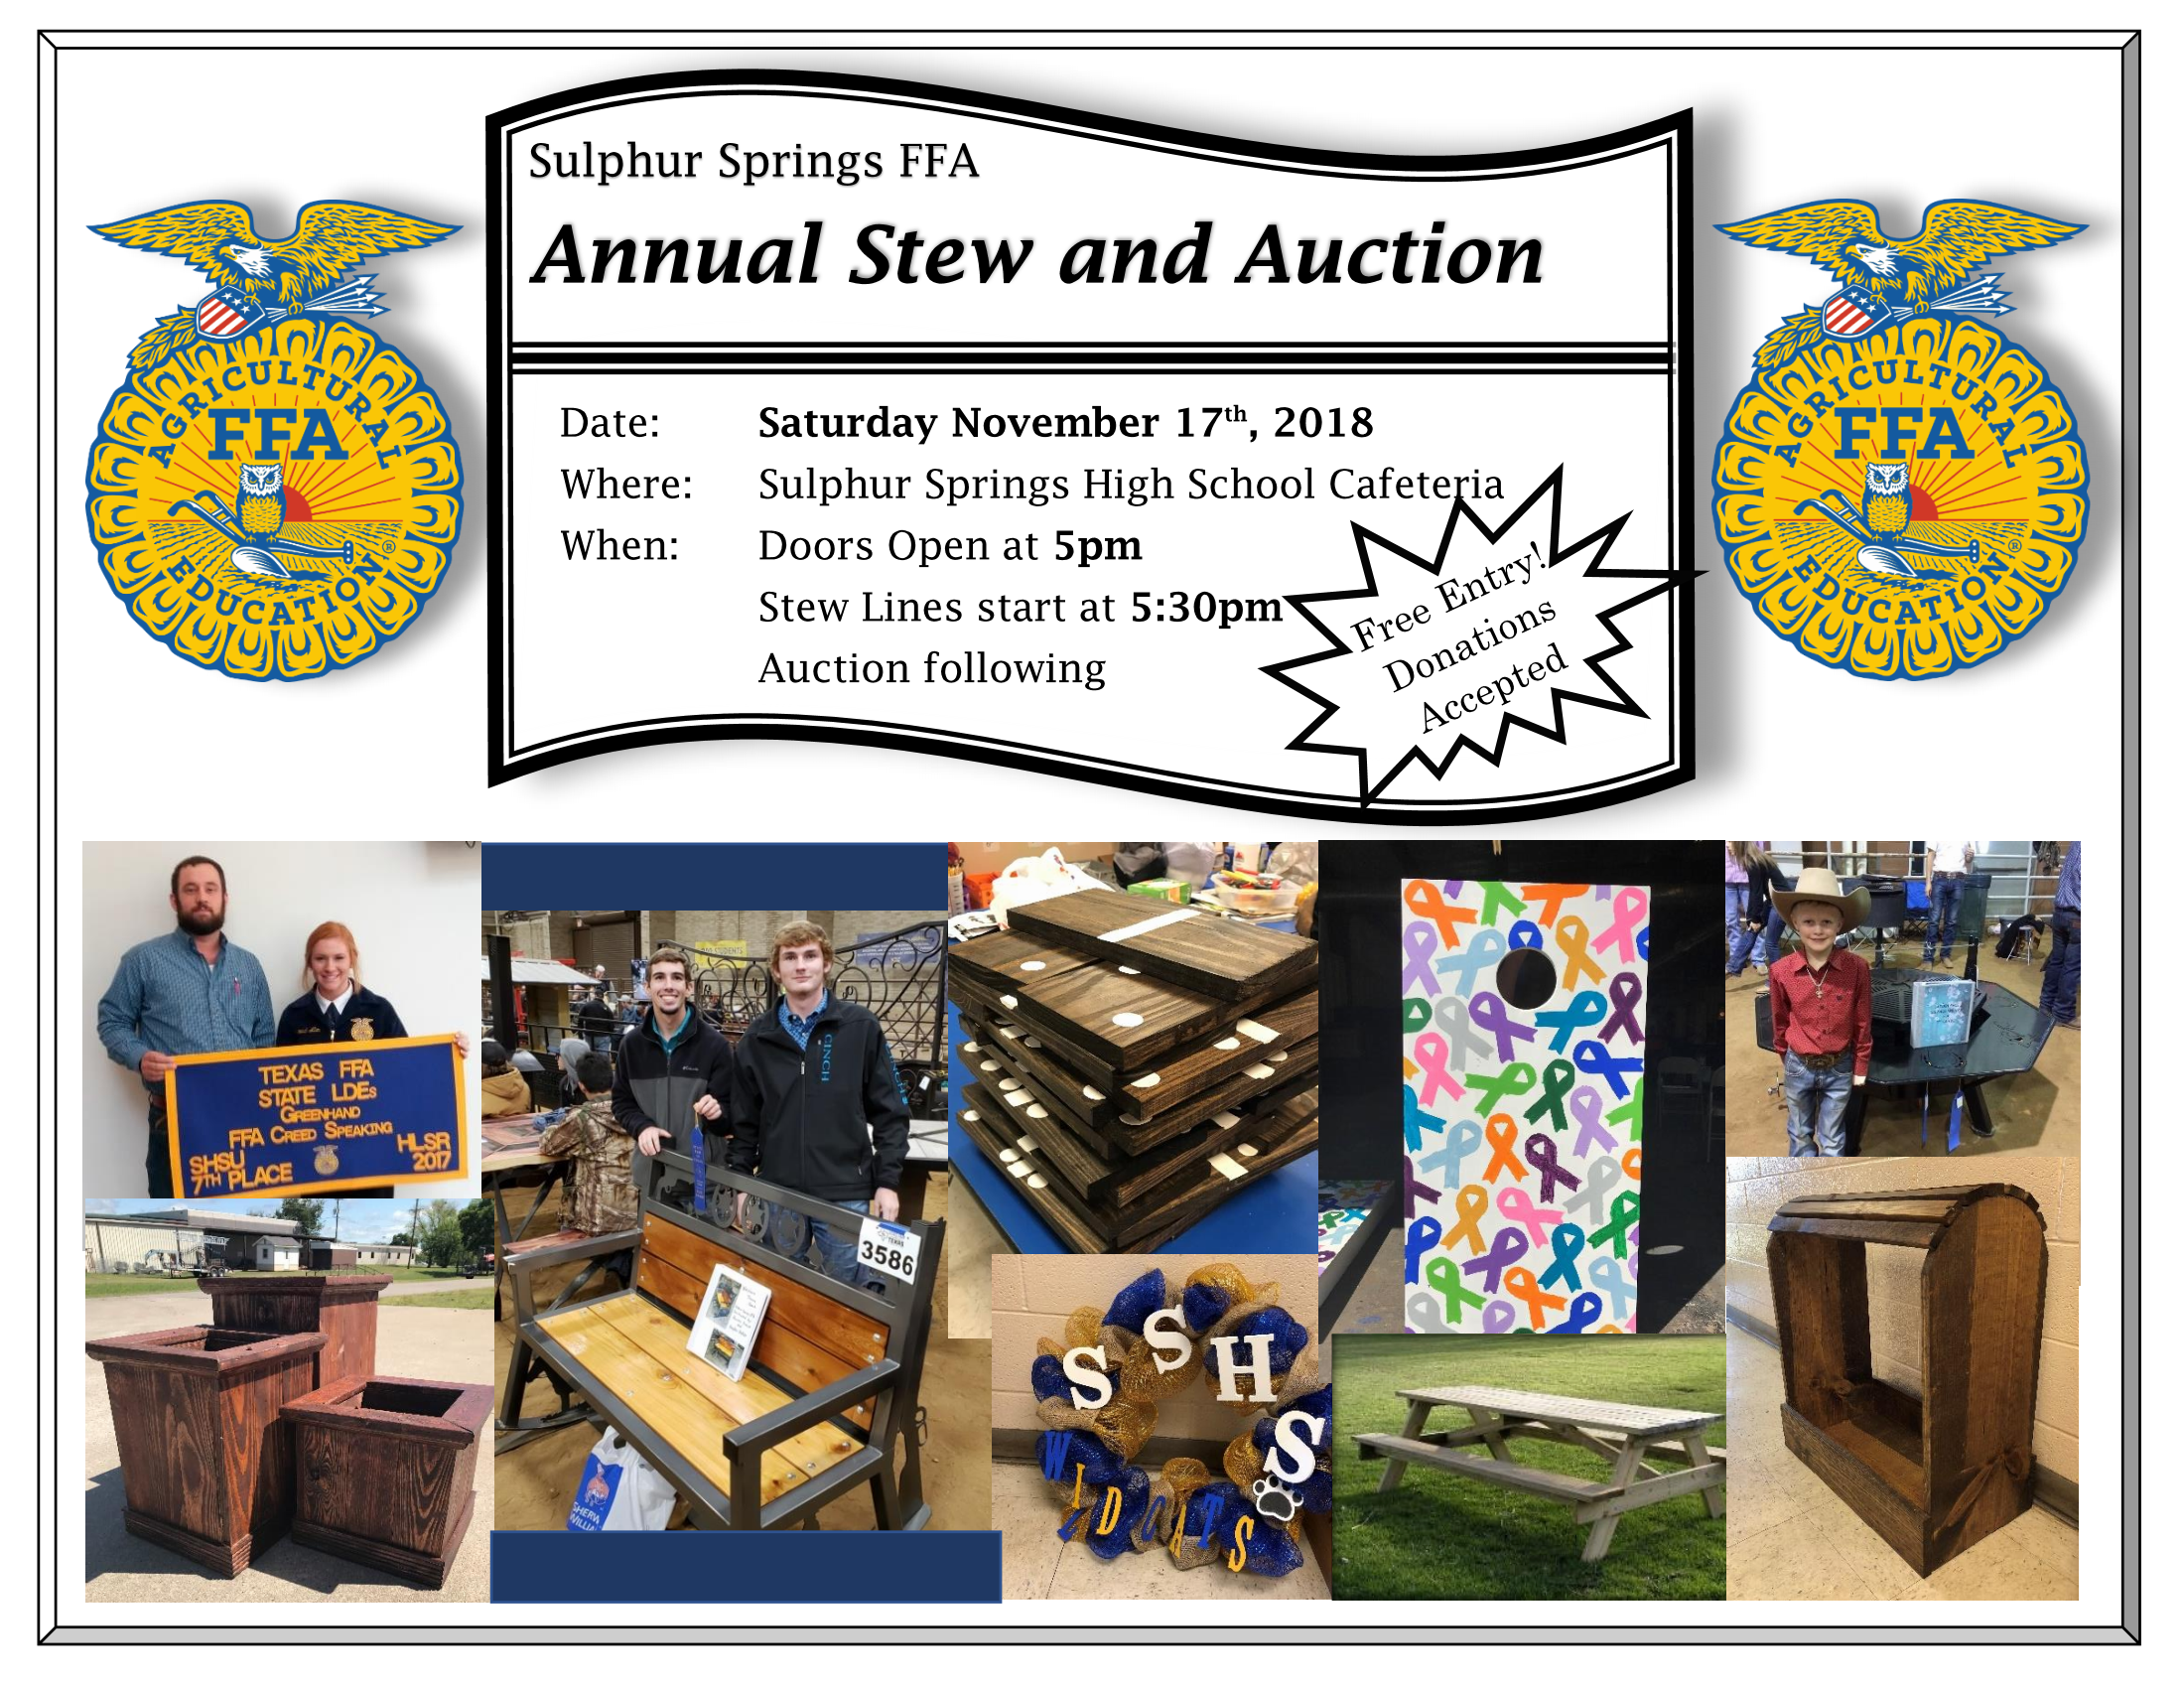 Sulphur Springs Annual Stew and Auction Coming up on Saturday, November 17th